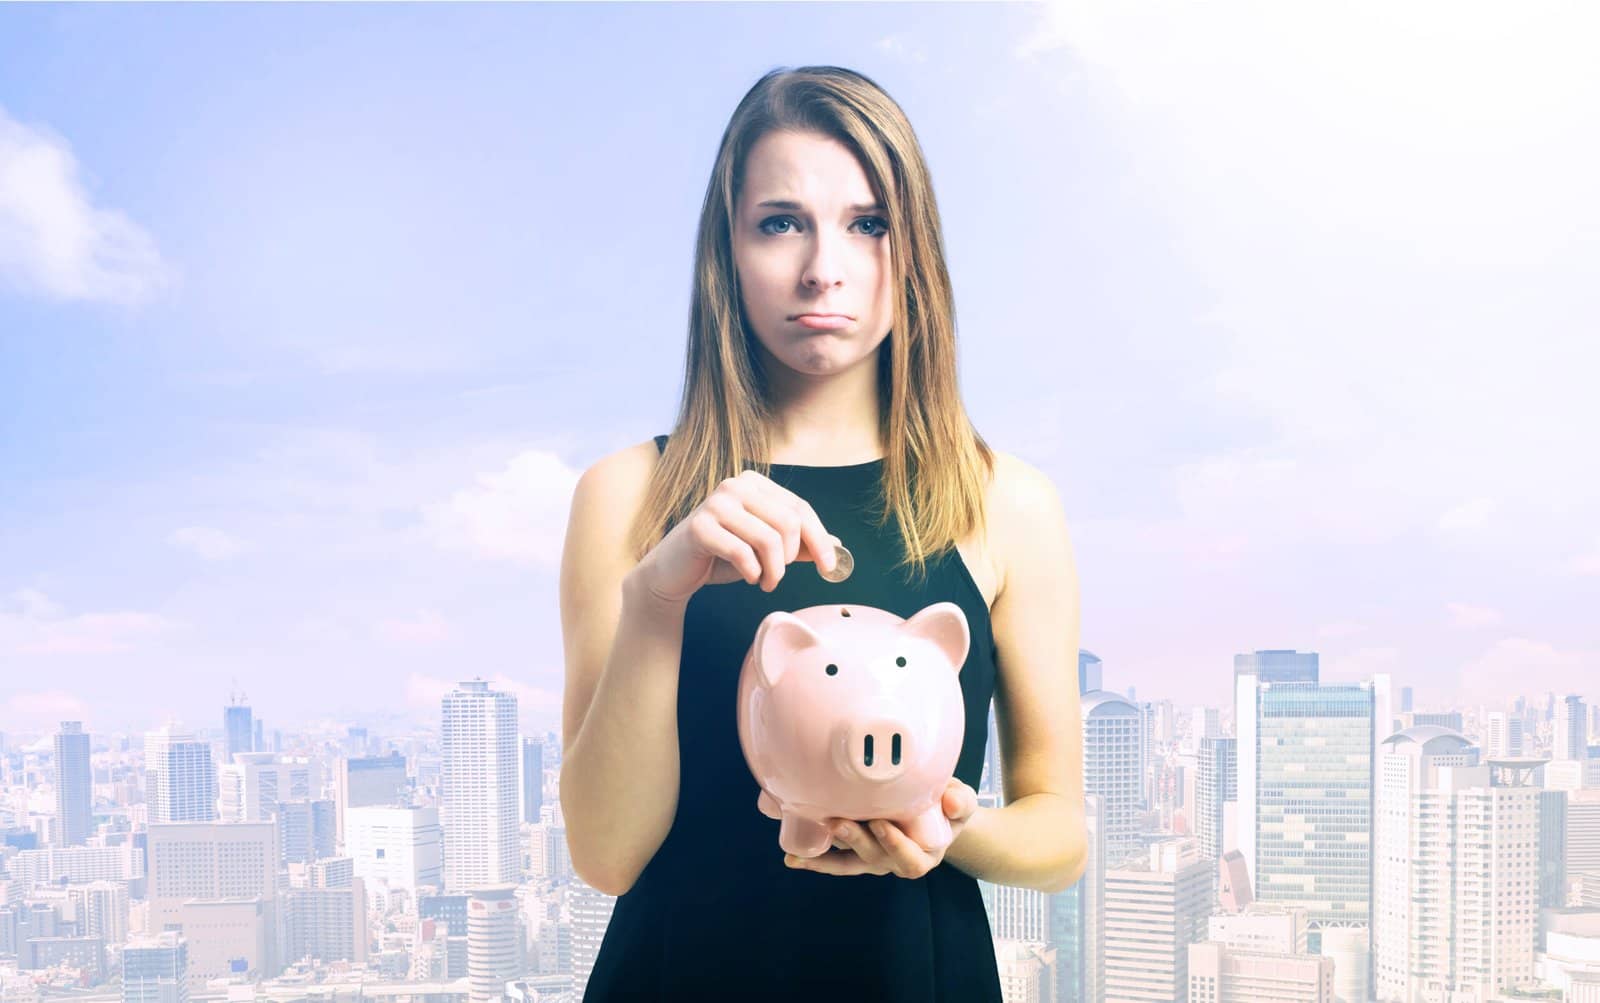 Photo of young woman in black dropping coins in a piggy bank